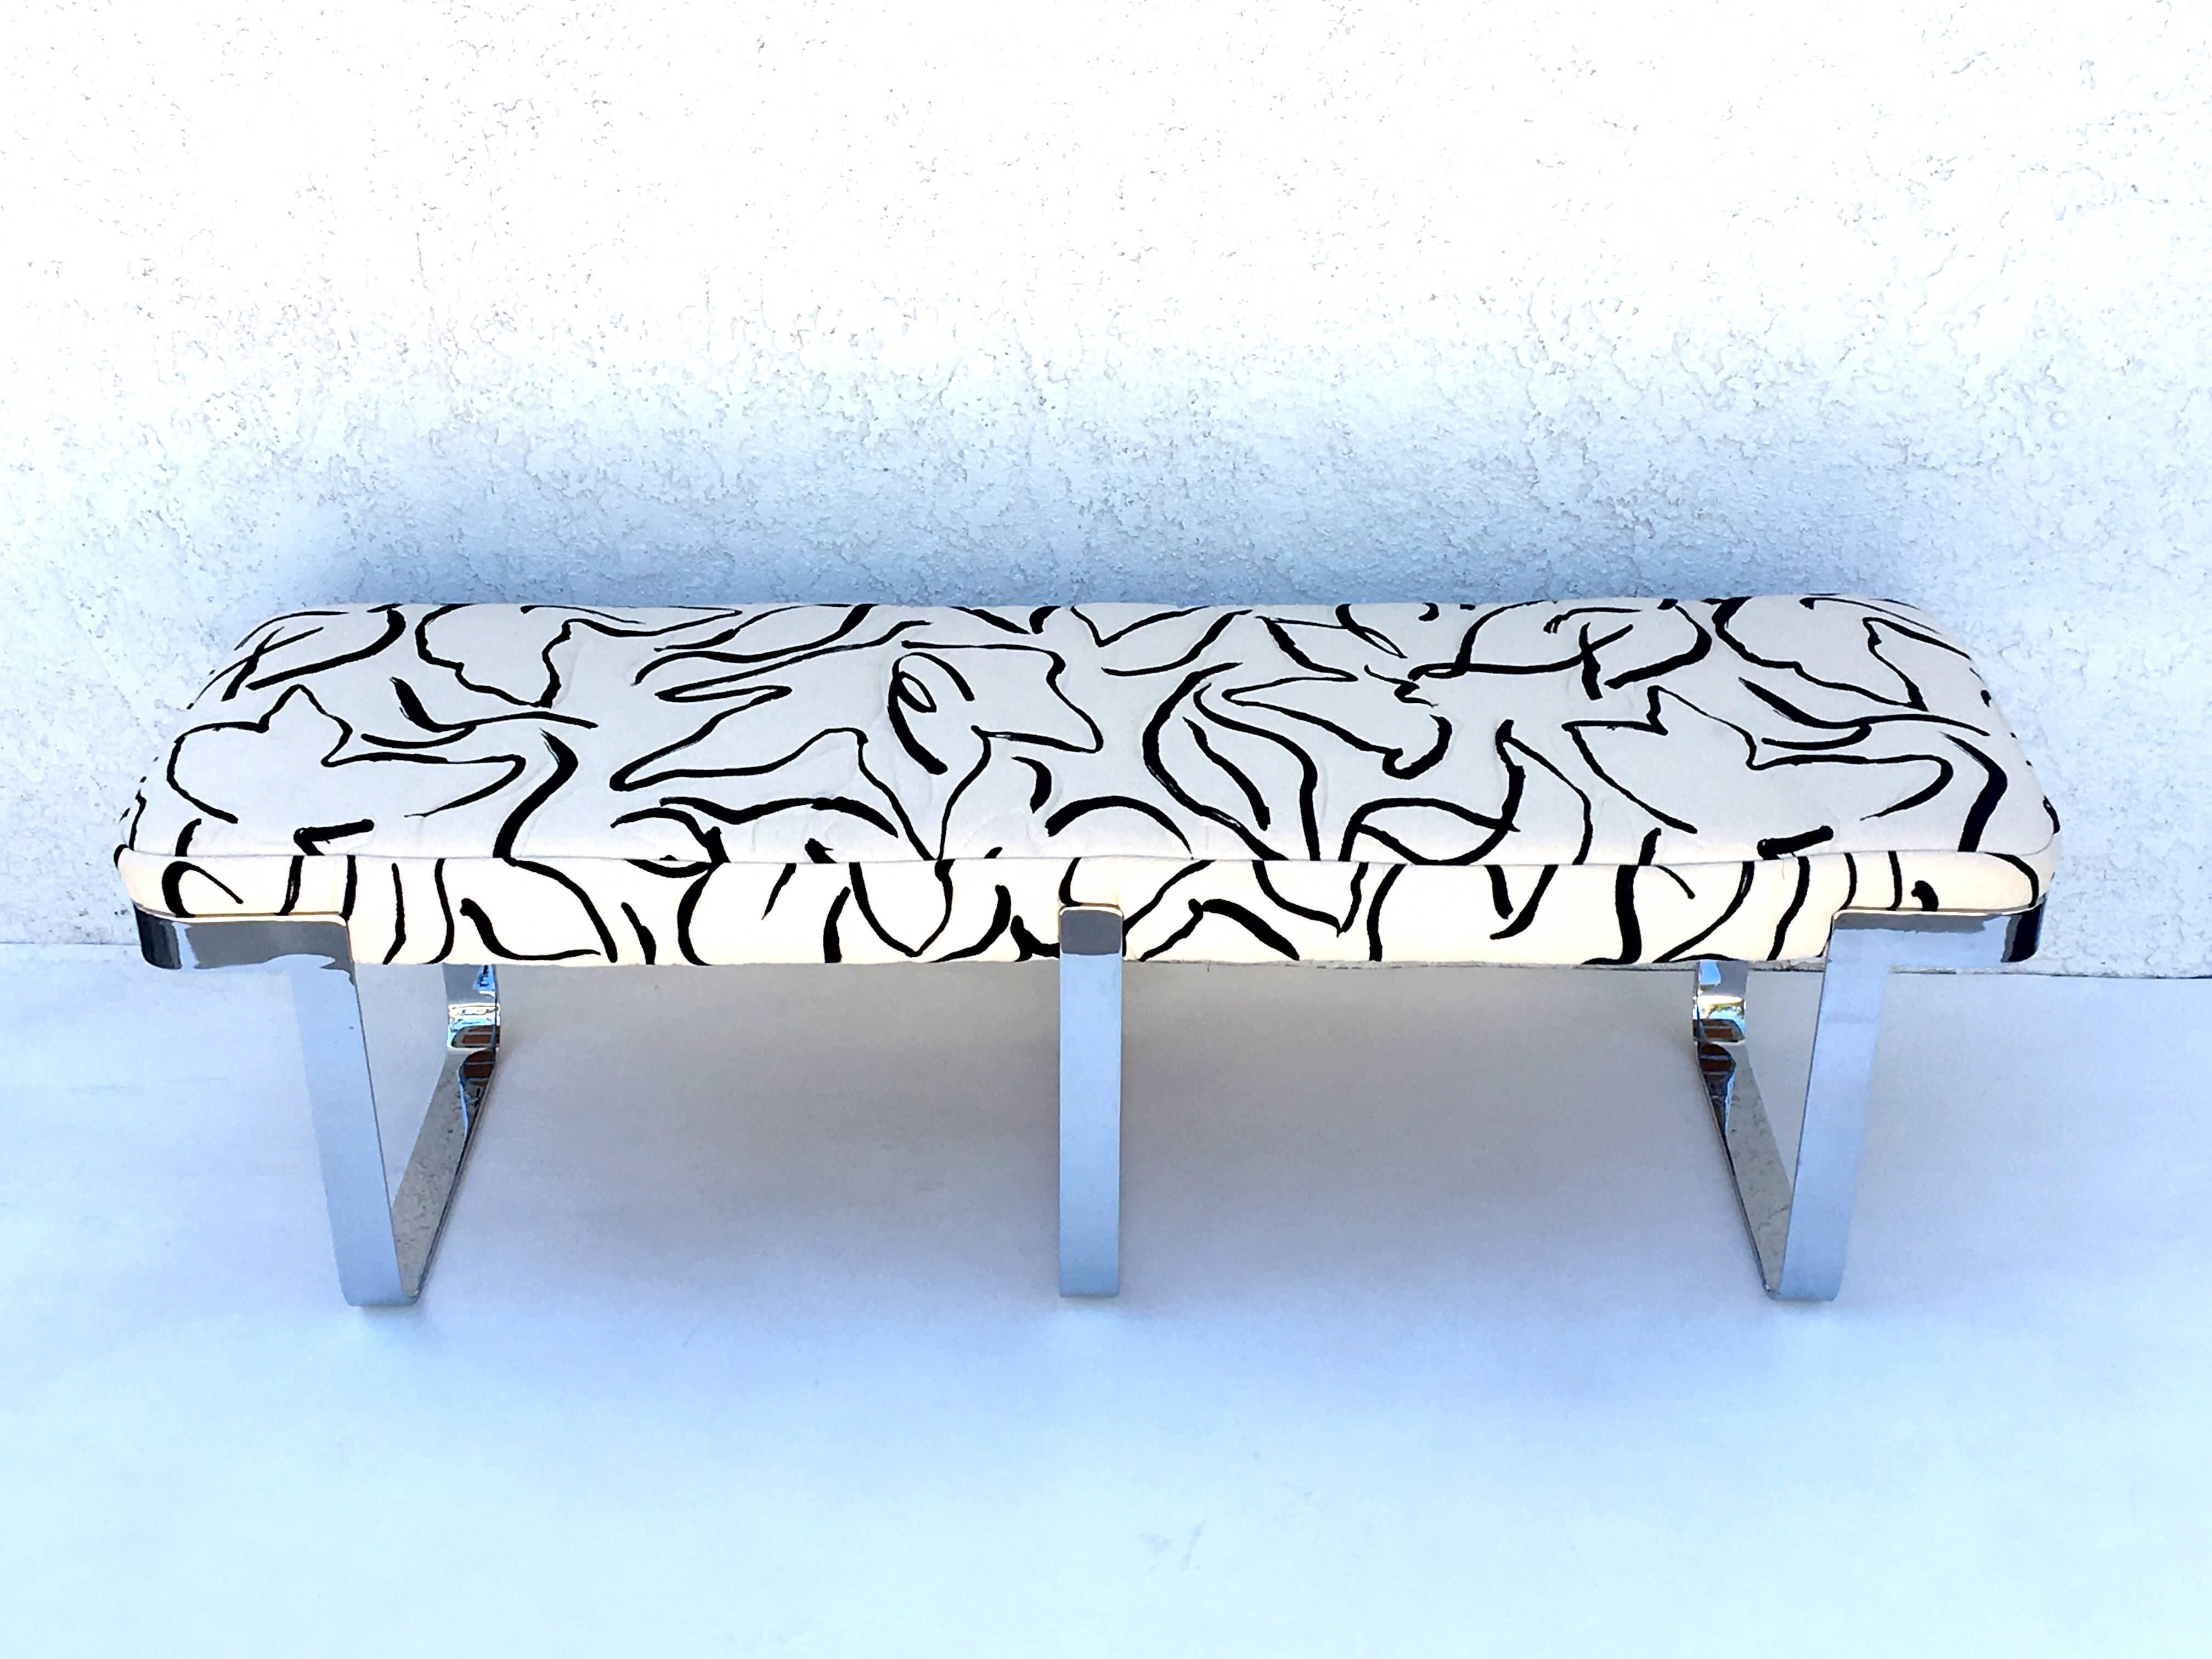 A beautiful polished chrome-plated solid steel bench by Tri-Mark Designs. Was reupholstered in the 1980s by Steve Chase with Donghia quilted fabric by prominent New York artist Richard Giglio. 

King-size bedspread and pillows are available if